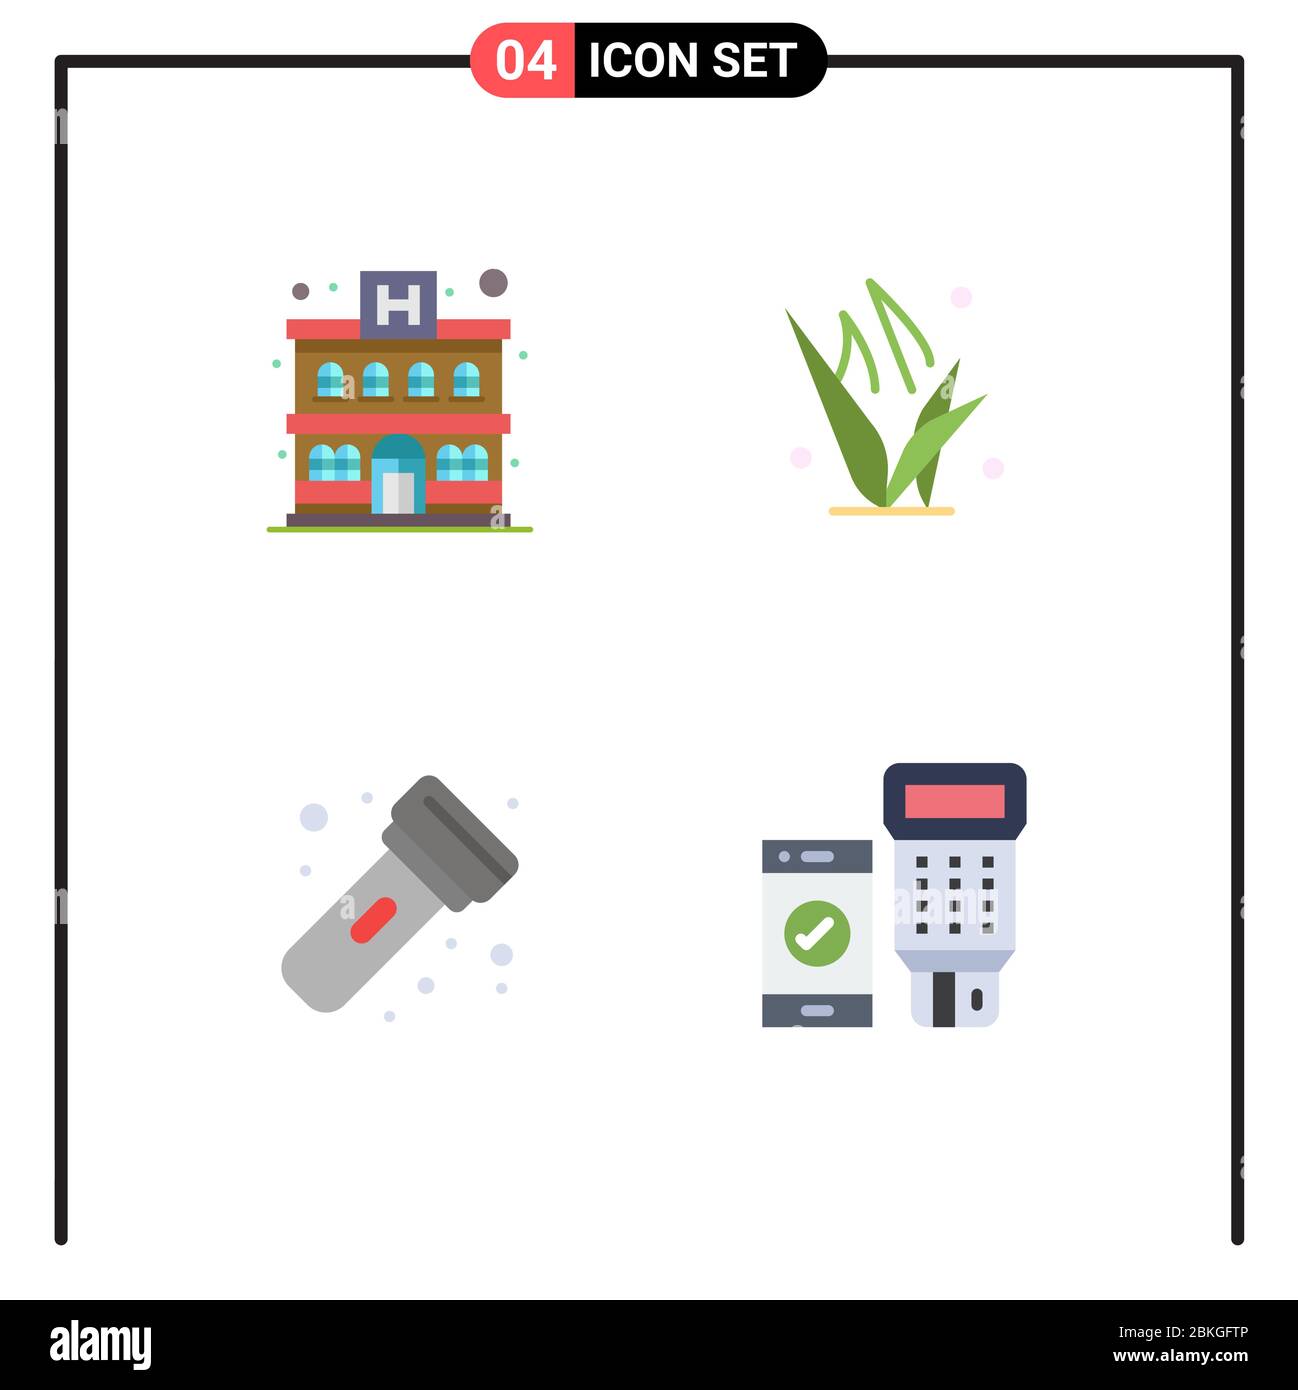 4 Thematic Vector Flat Icons and Editable Symbols of apartment, light, grass, spring, code Editable Vector Design Elements Stock Vector